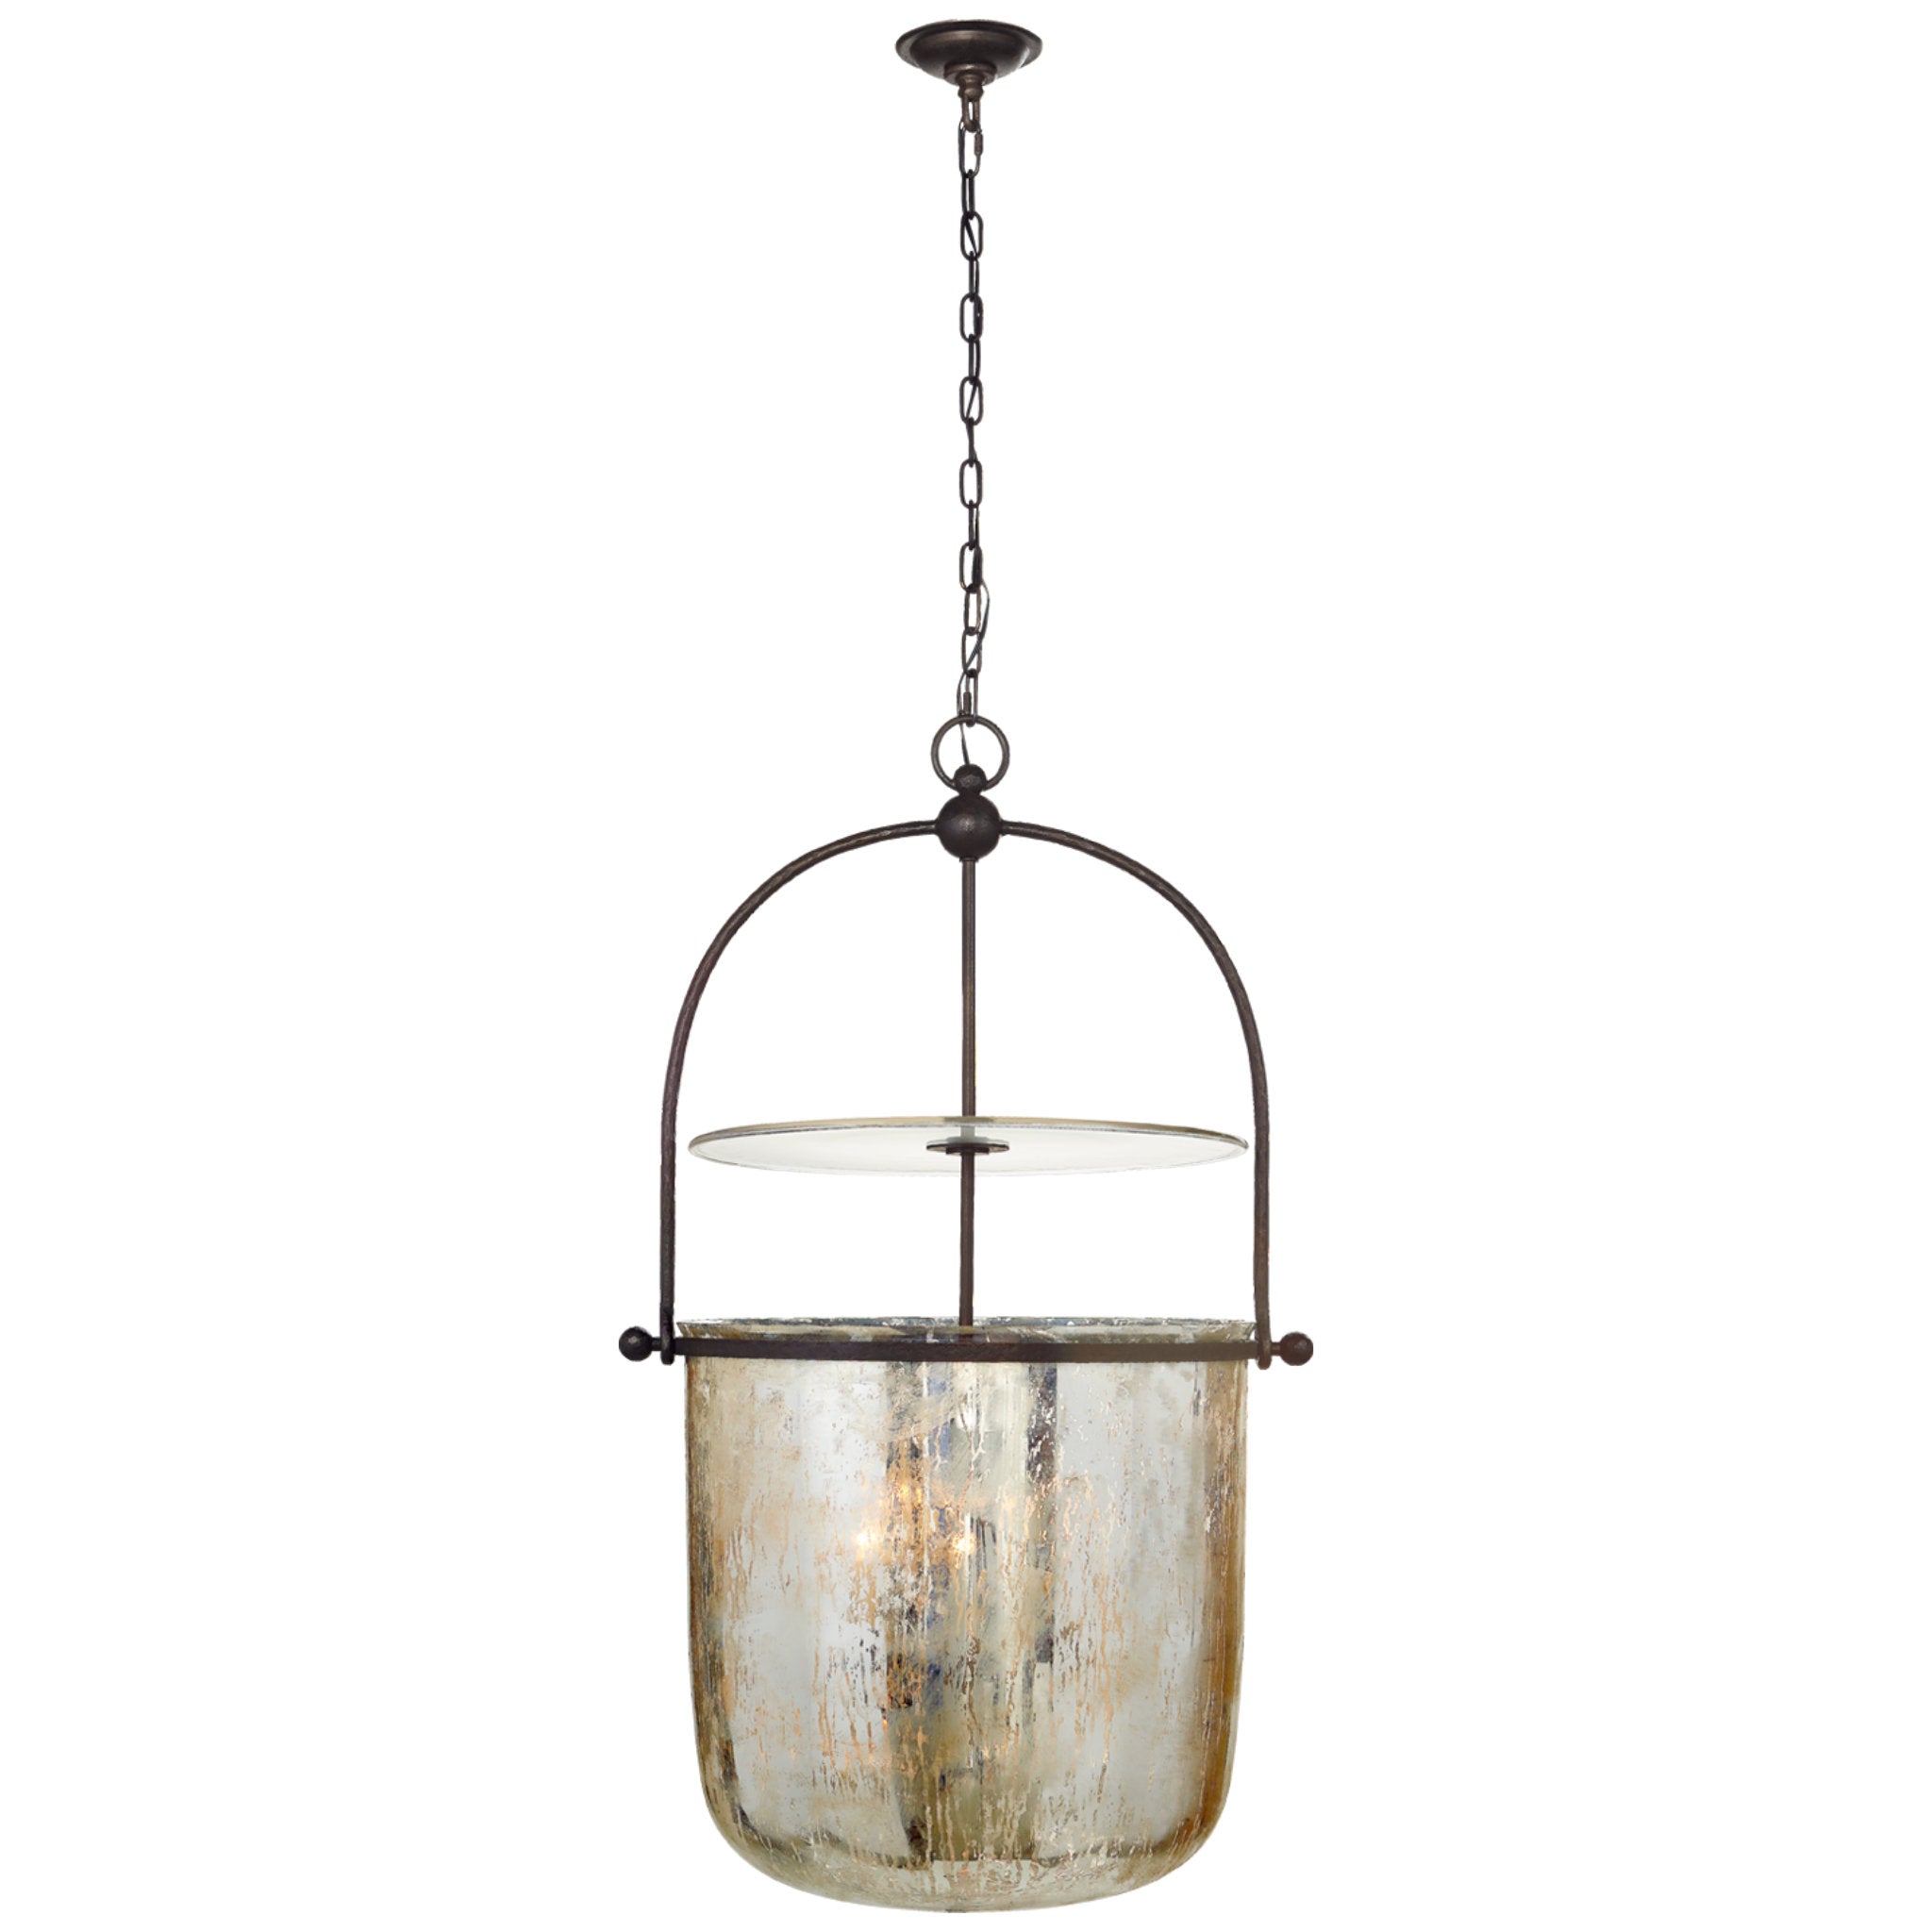 Chapman & Myers Lorford Large Smoke Bell Lantern in Aged Iron with Antiqued Mercury Glass